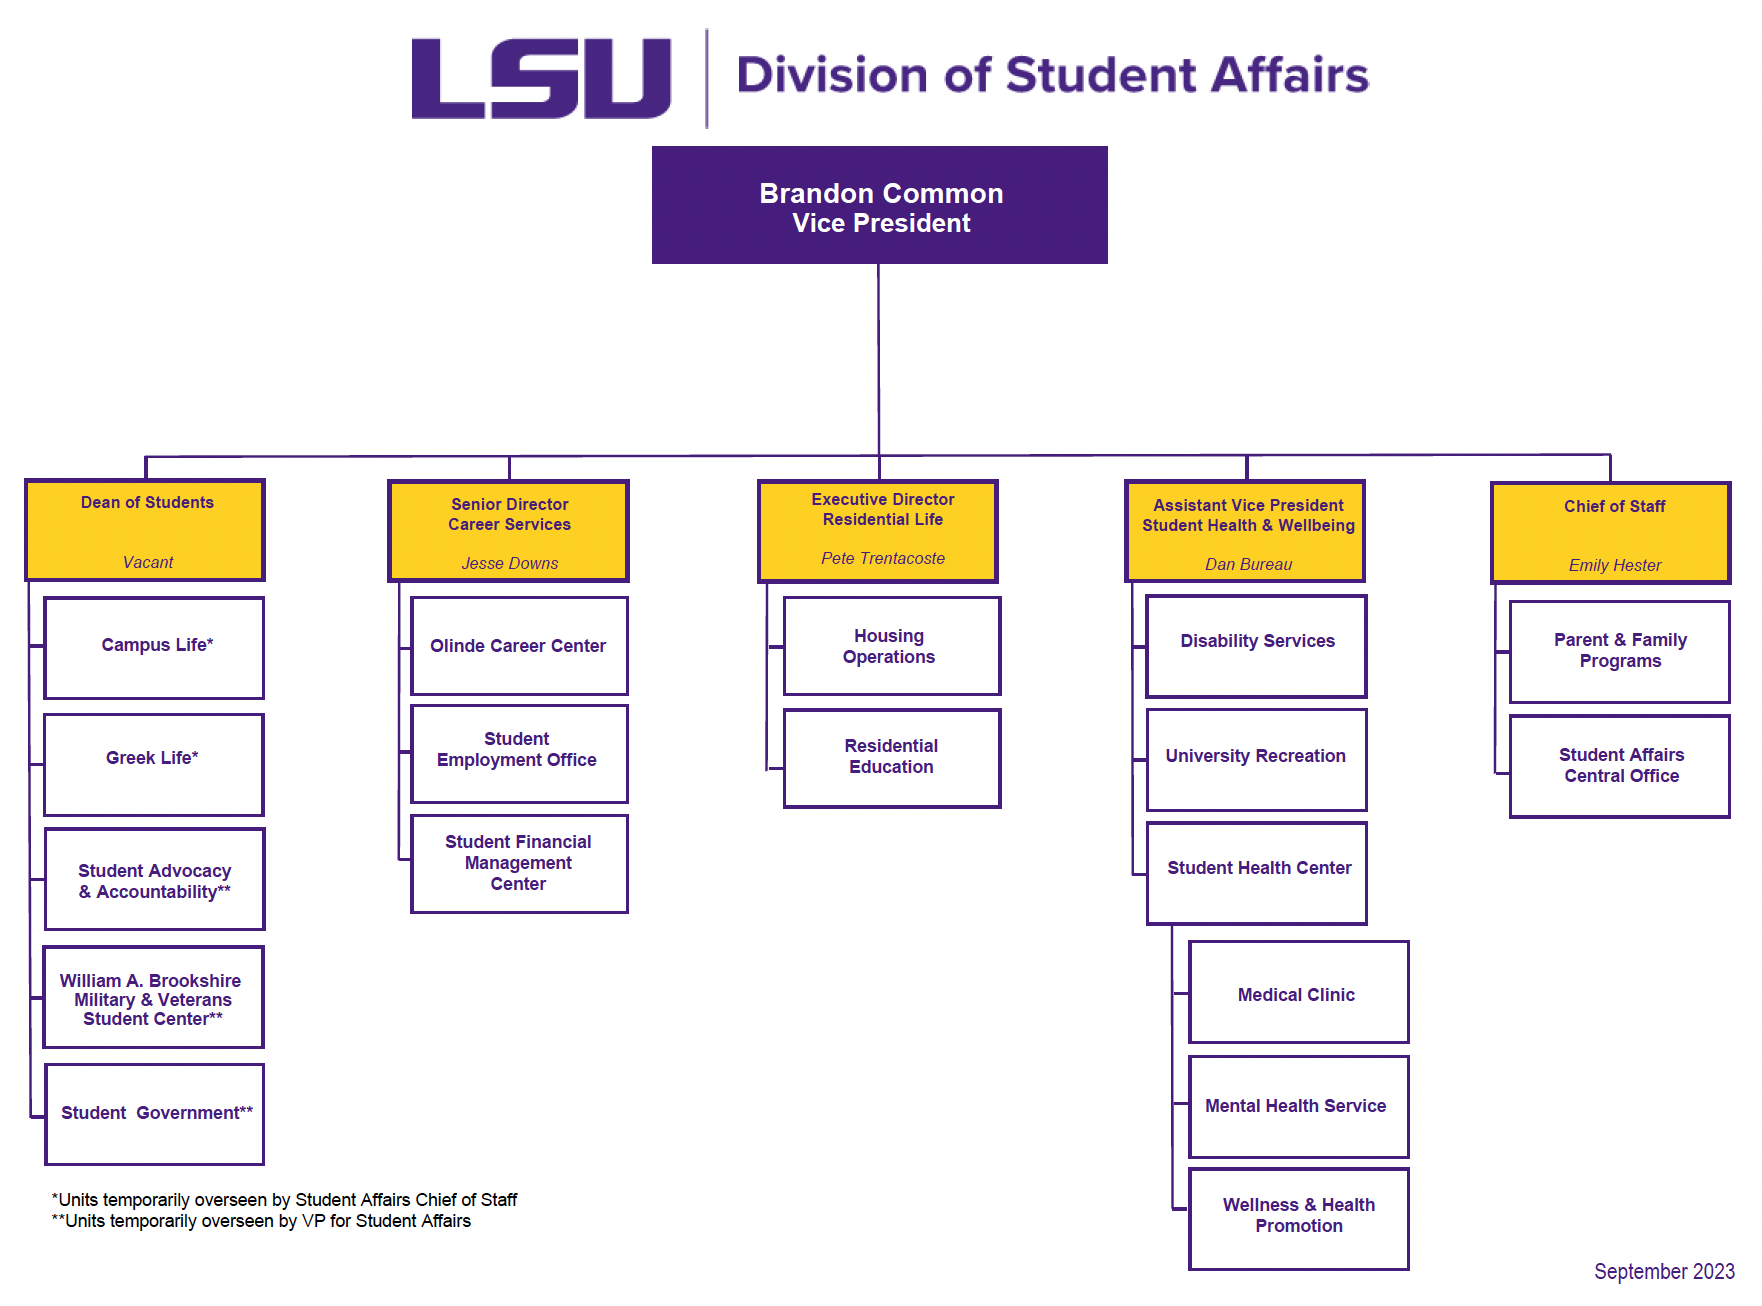 image of Division of Student Affairs org chart